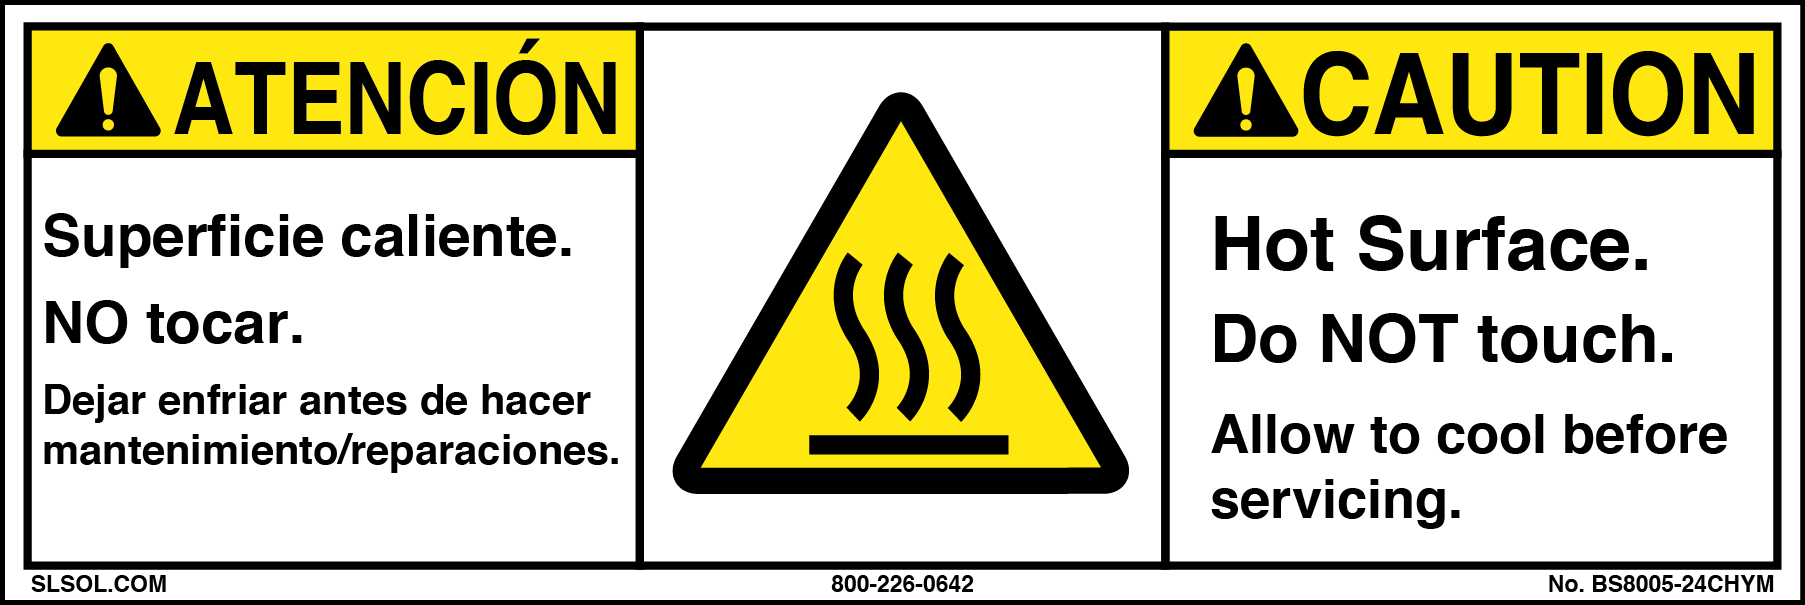 Iso 3864 safety label